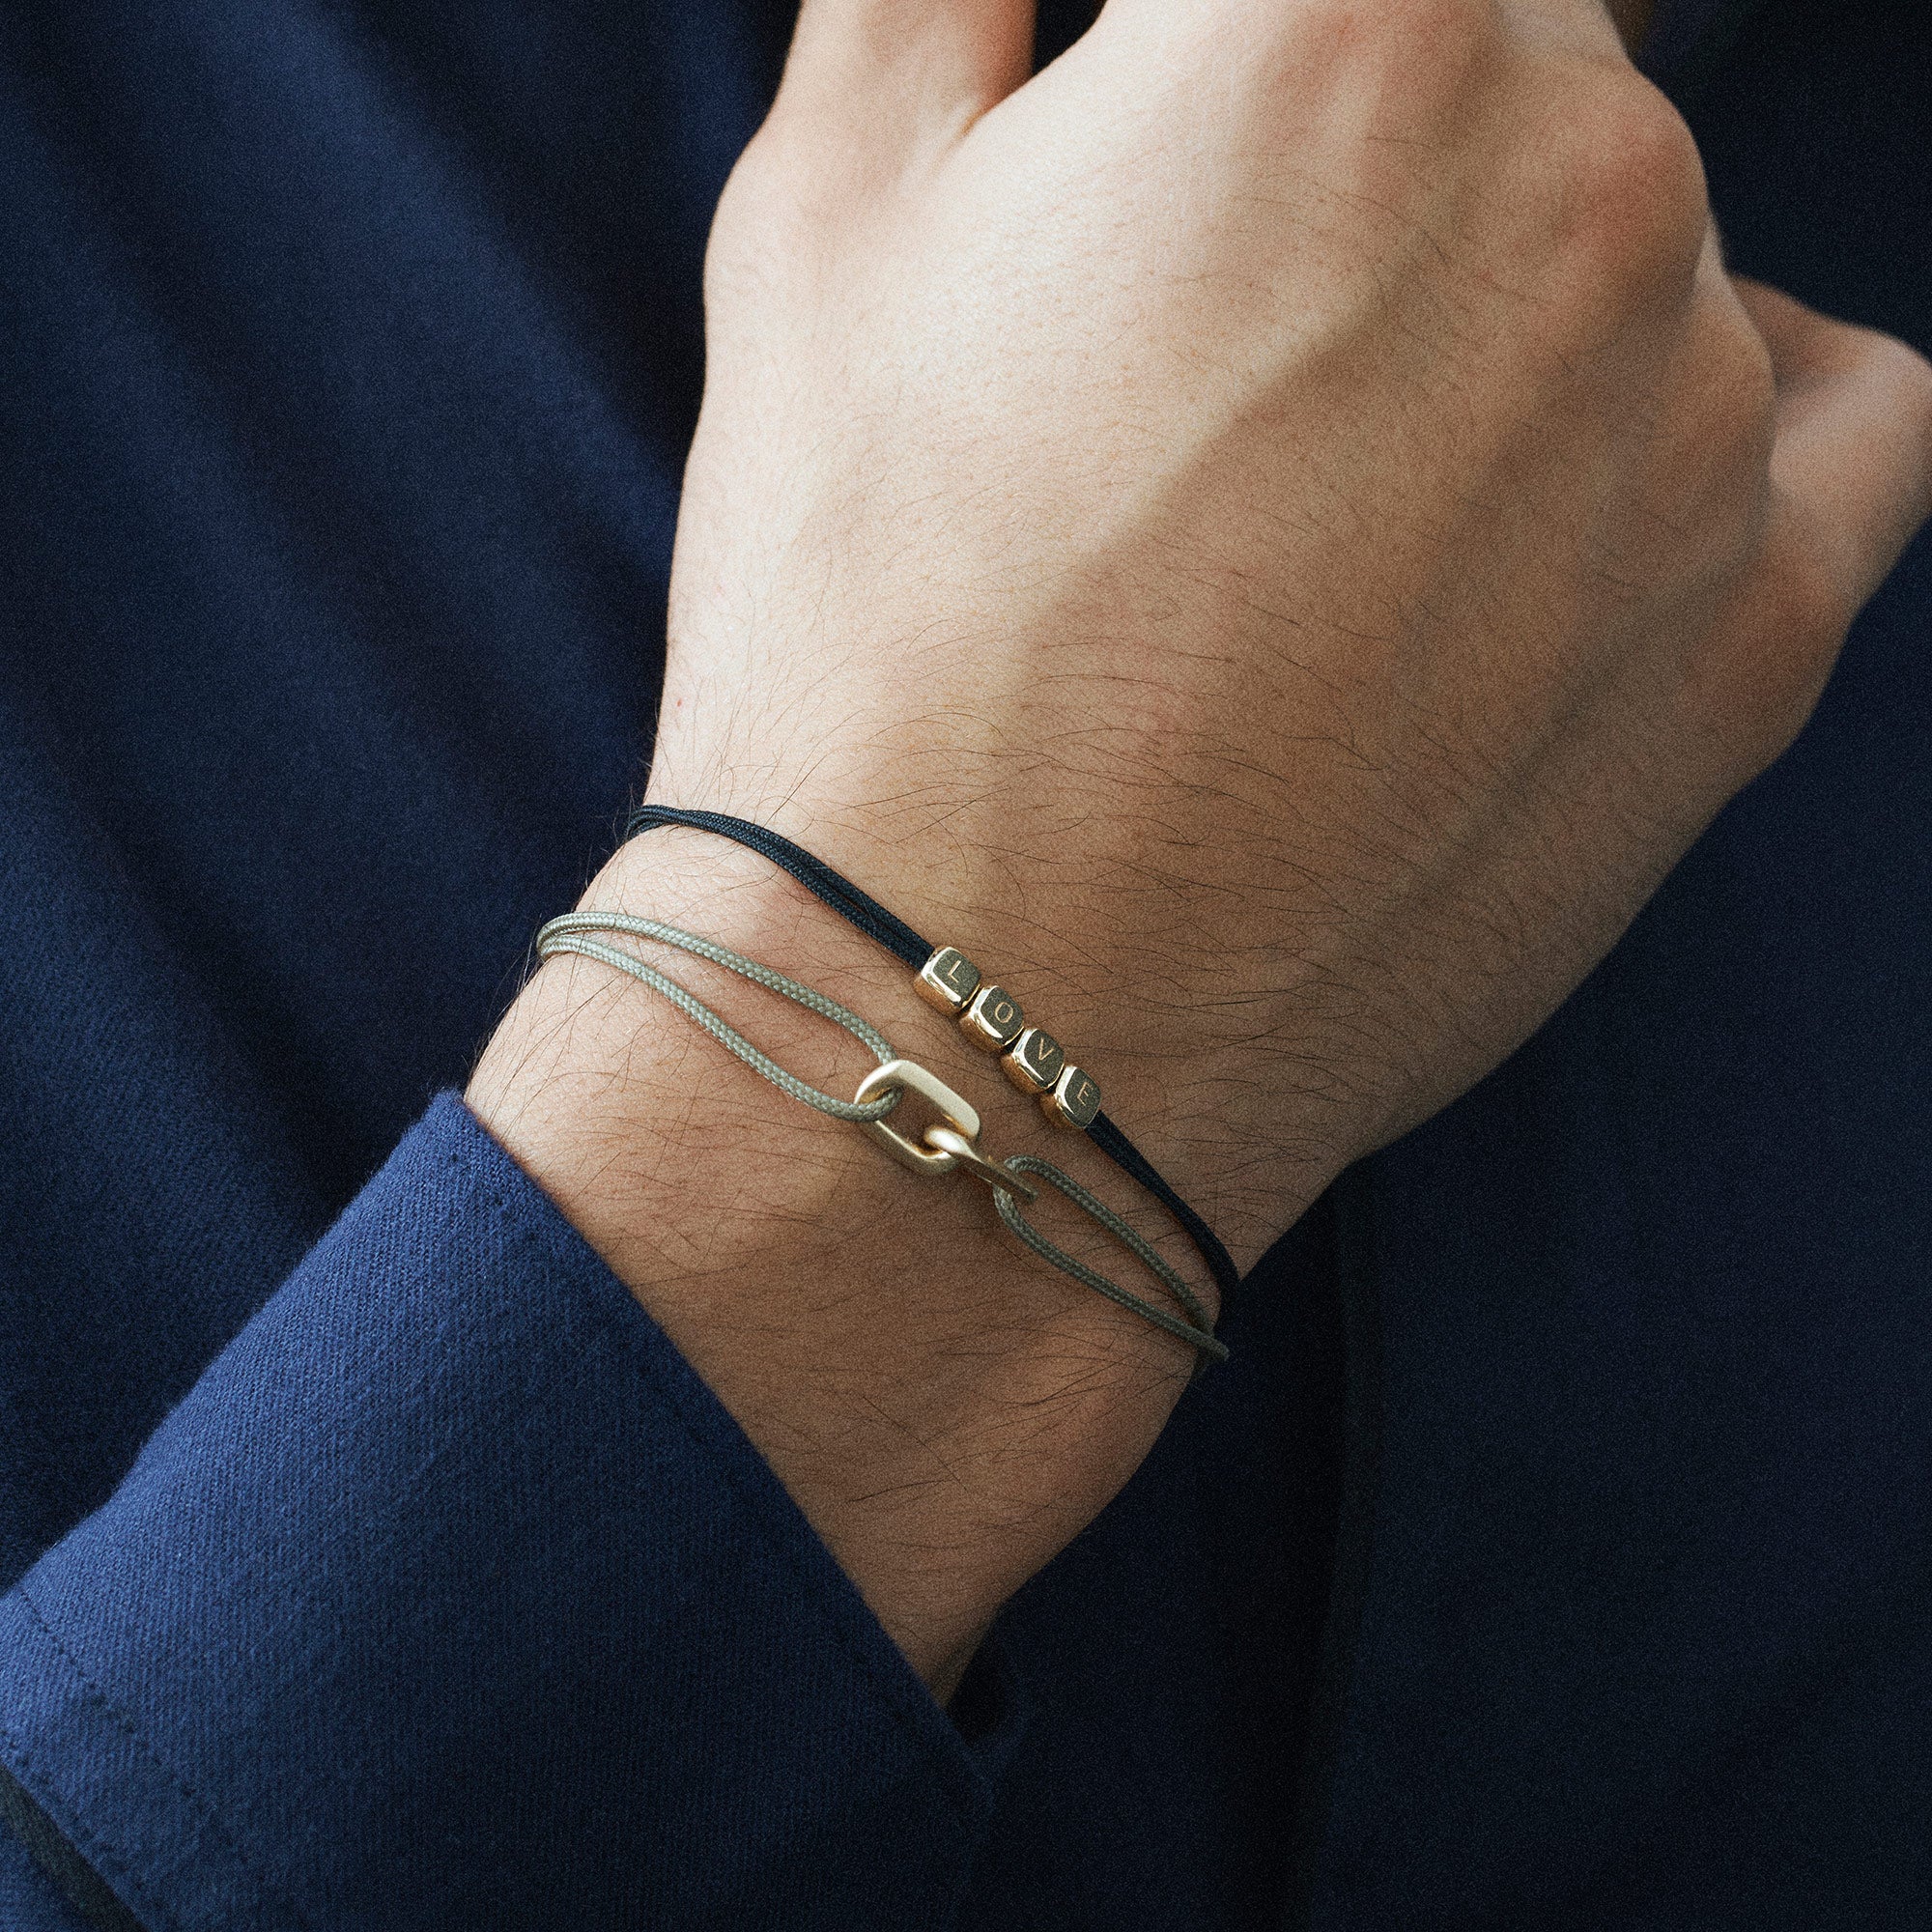 Curb link bracelet in sterling silver, extra large. | Tiffany & Co.